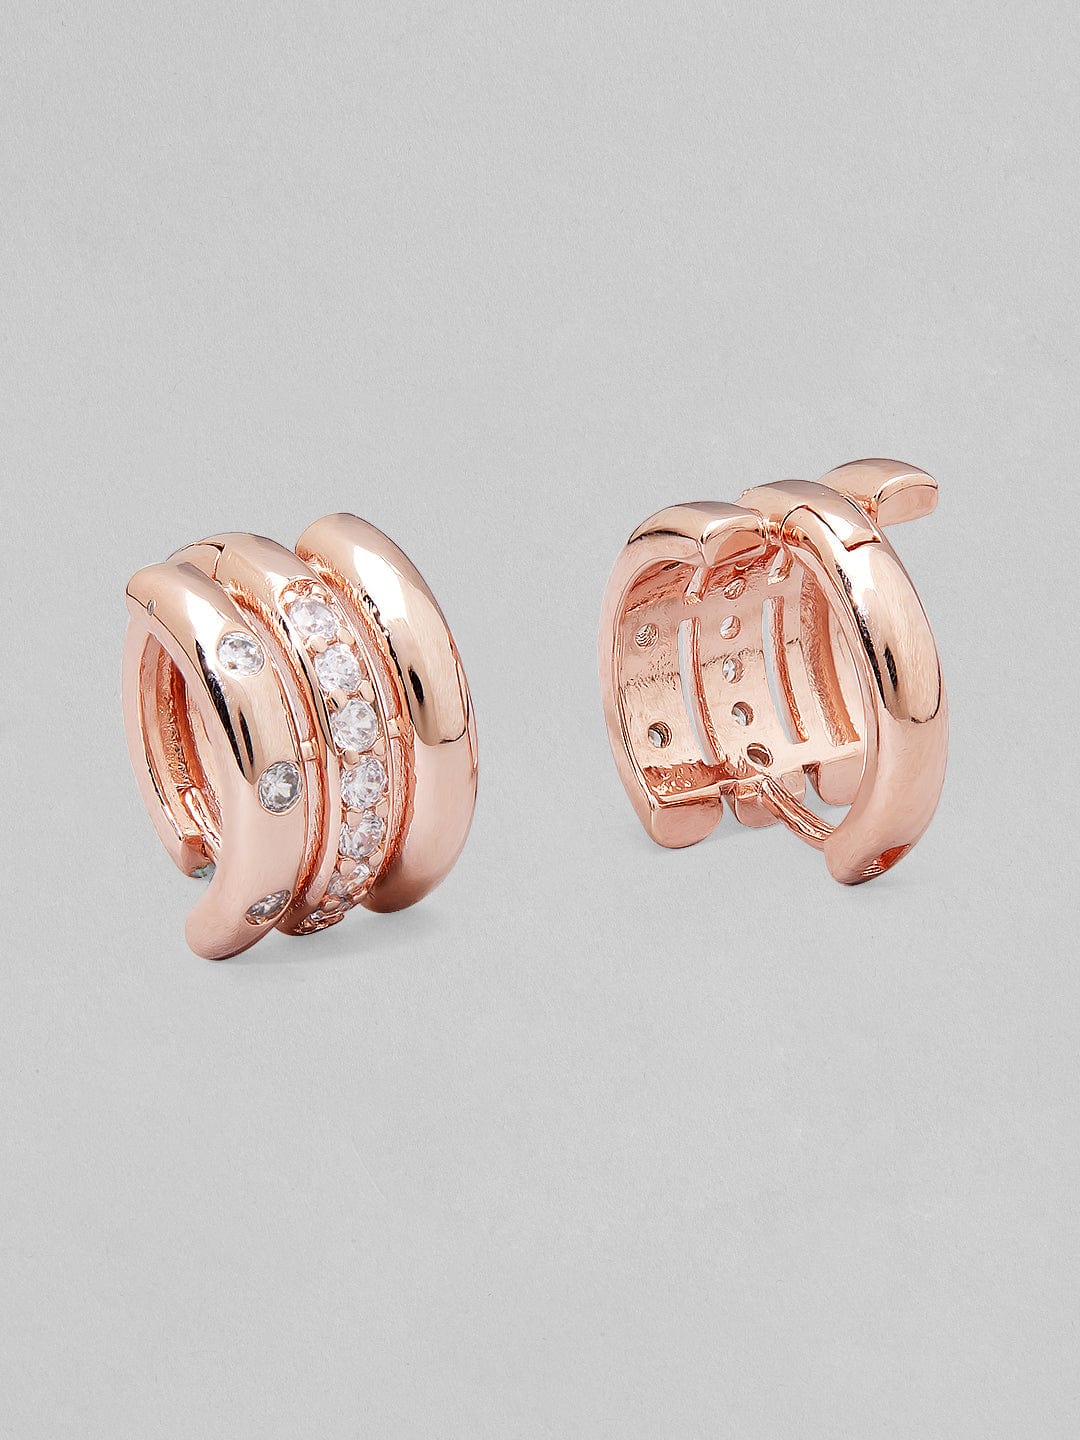 Rubans Voguish Rose Gold Plated High Polish Western Hoop Earrings With Ad. Earrings